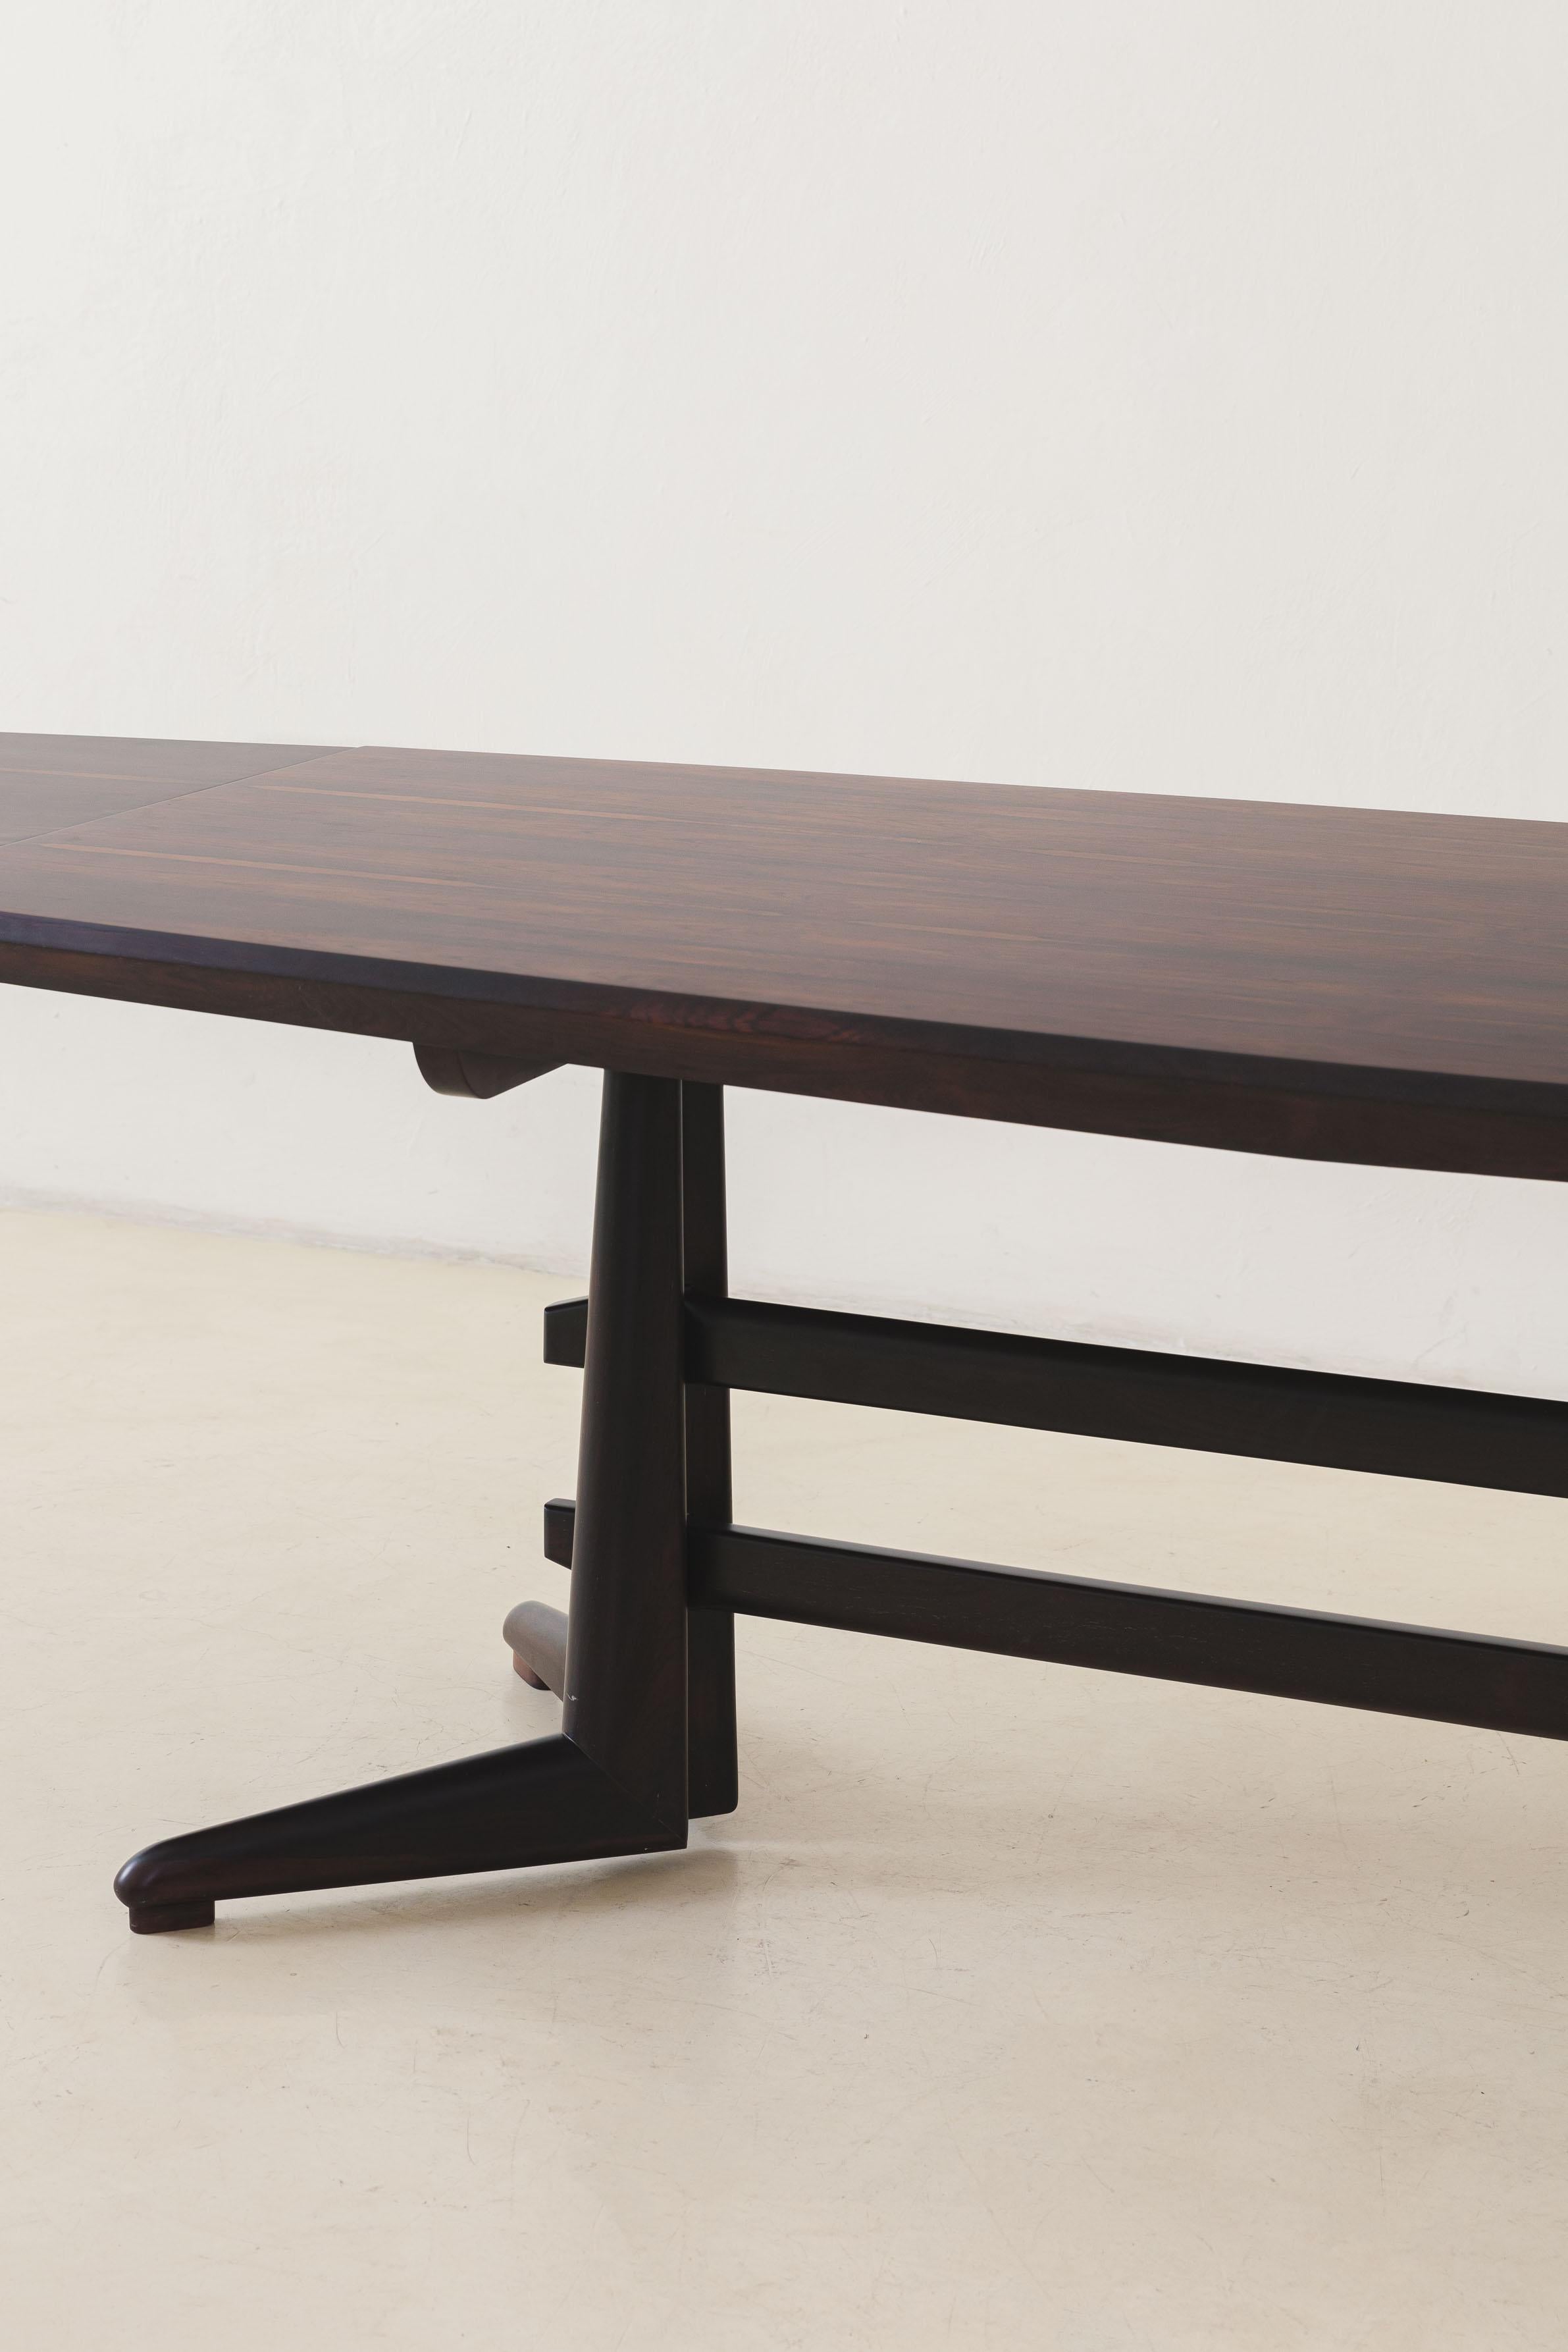 Rosewood Dining Table by Jean Gillon, Italma, 1960s, Brazilian Midcentury In Good Condition For Sale In New York, NY